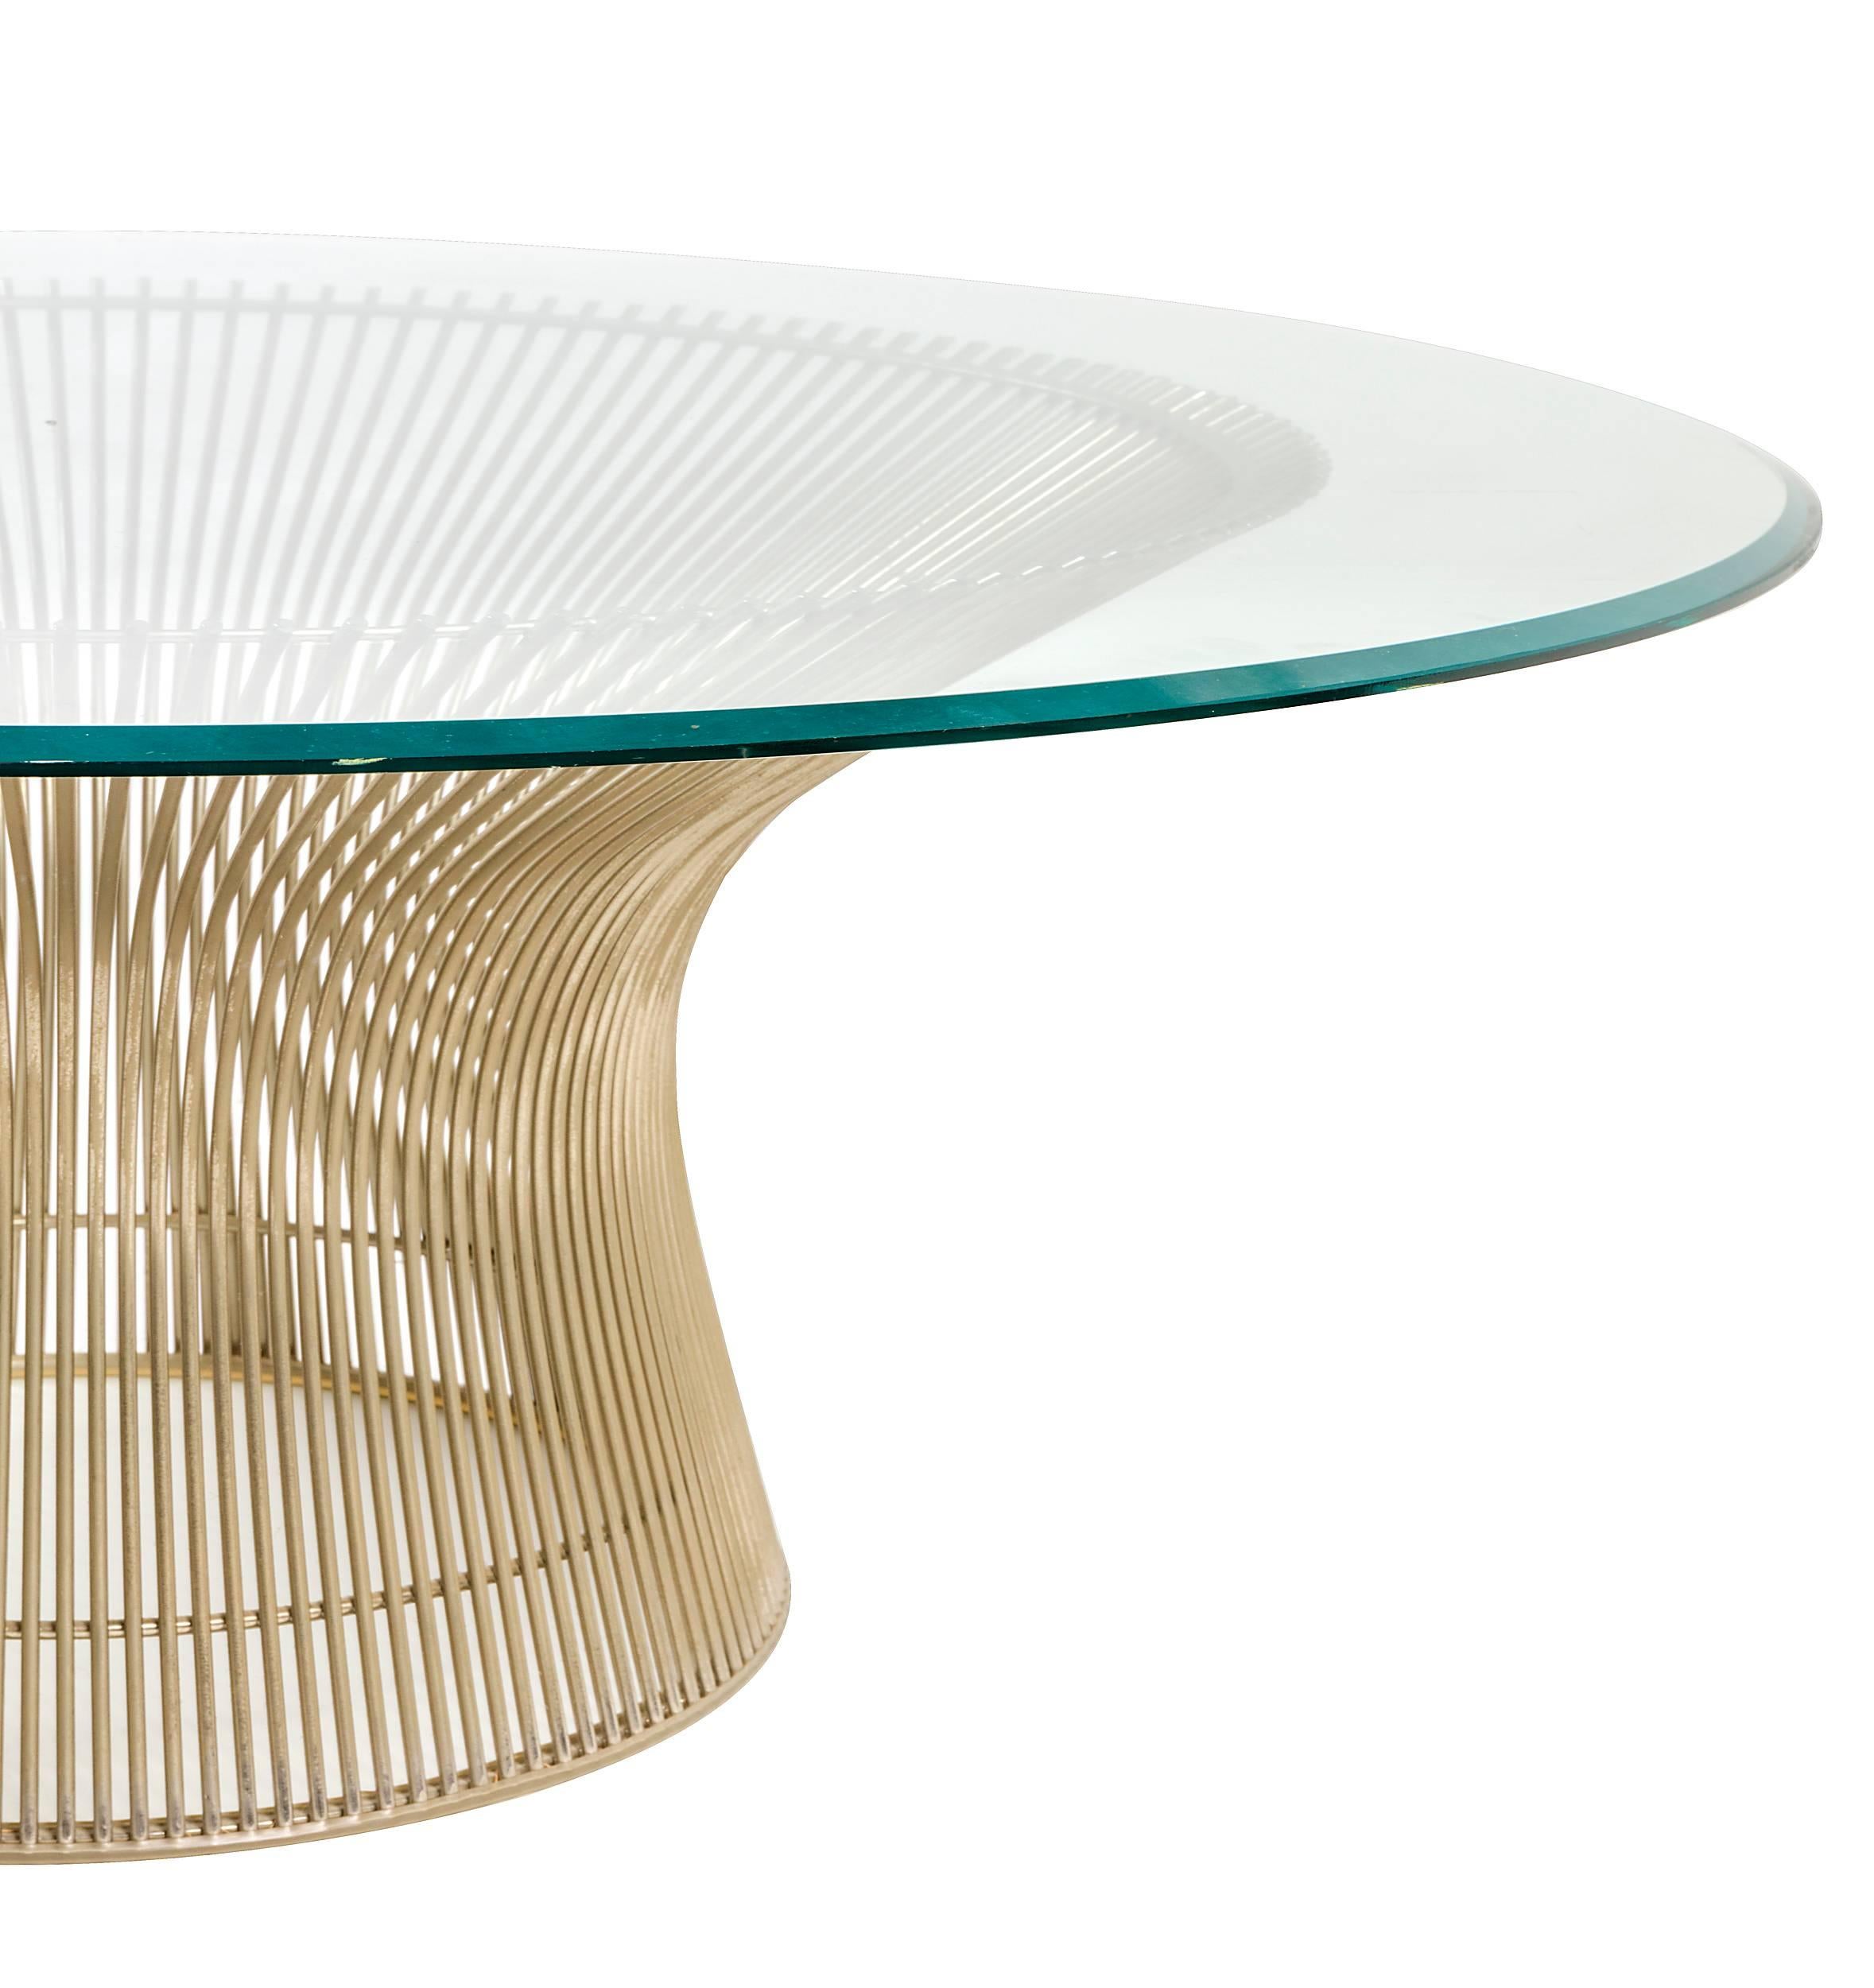 Beveled Warren Platner Glass Top Coffee Table with Sculptural Wire Base,  USA 1970s